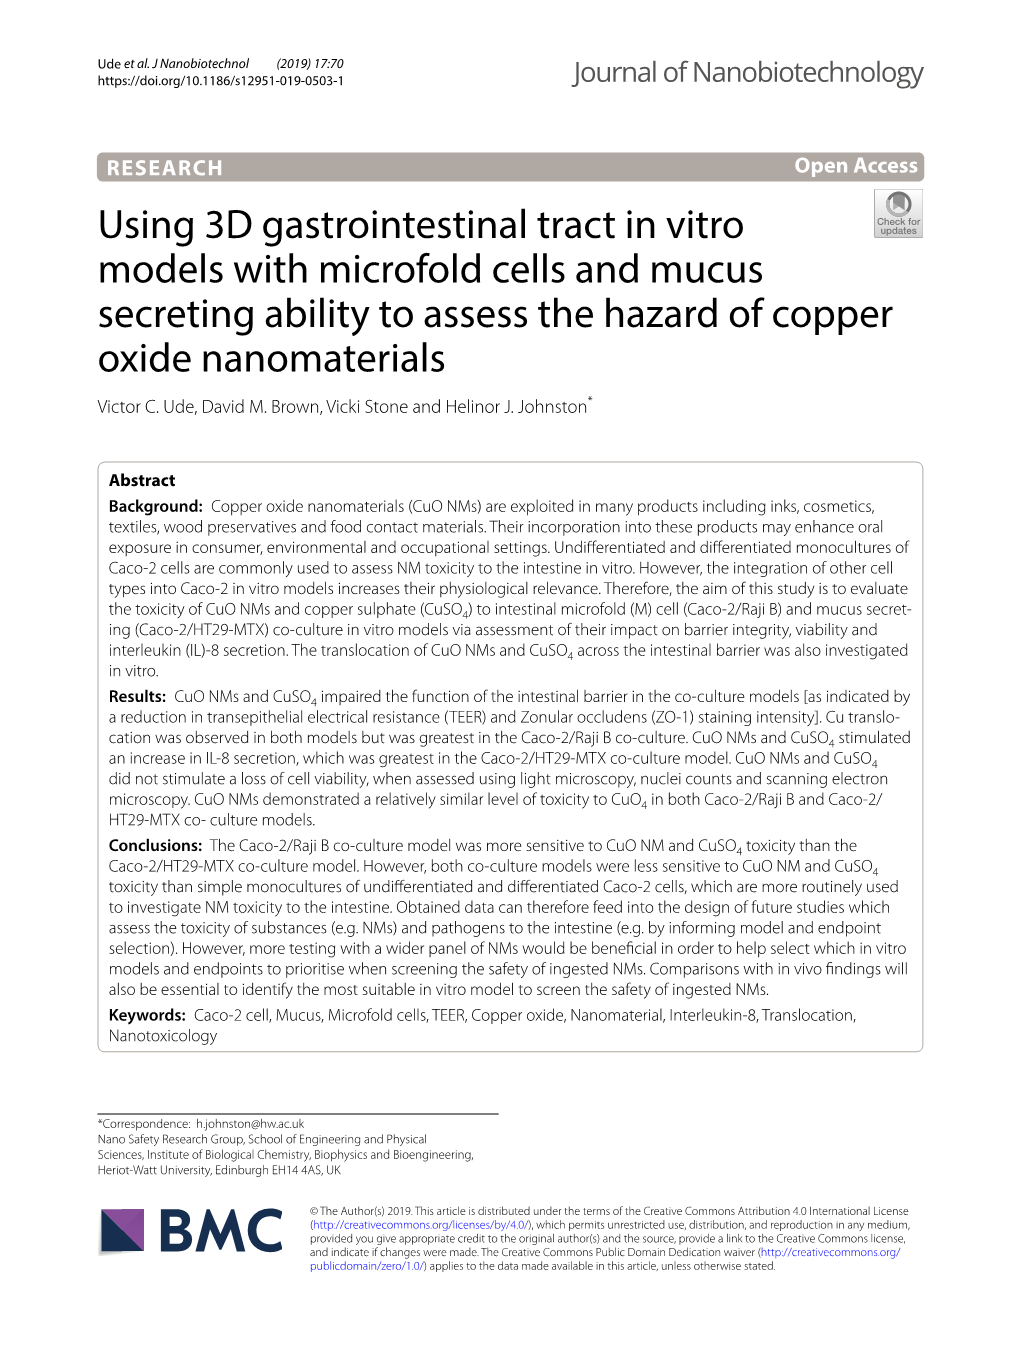 Using 3D Gastrointestinal Tract in Vitro Models with Microfold Cells and Mucus Secreting Ability to Assess the Hazard of Copper Oxide Nanomaterials Victor C